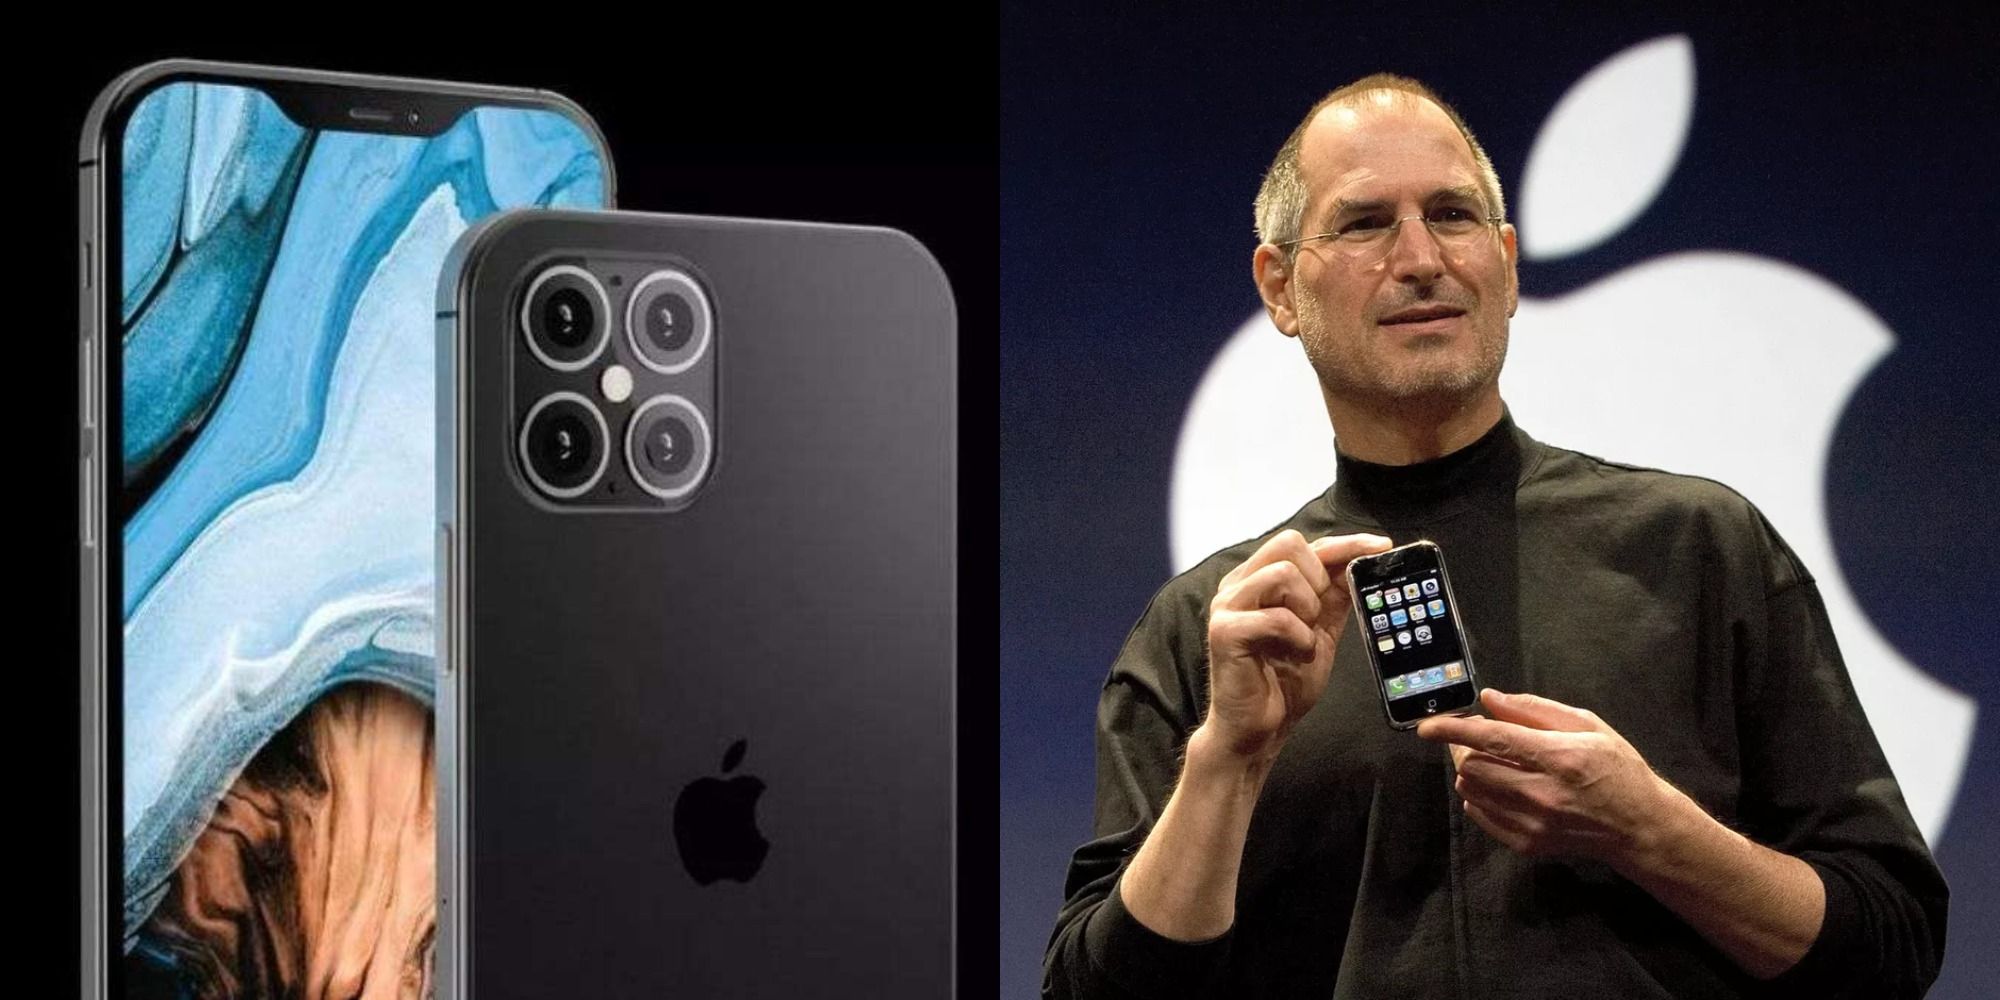 Apple iPhone 12 promo photo next to a photo of Steve Jobs holding the original iPhone in front of an Apple logo